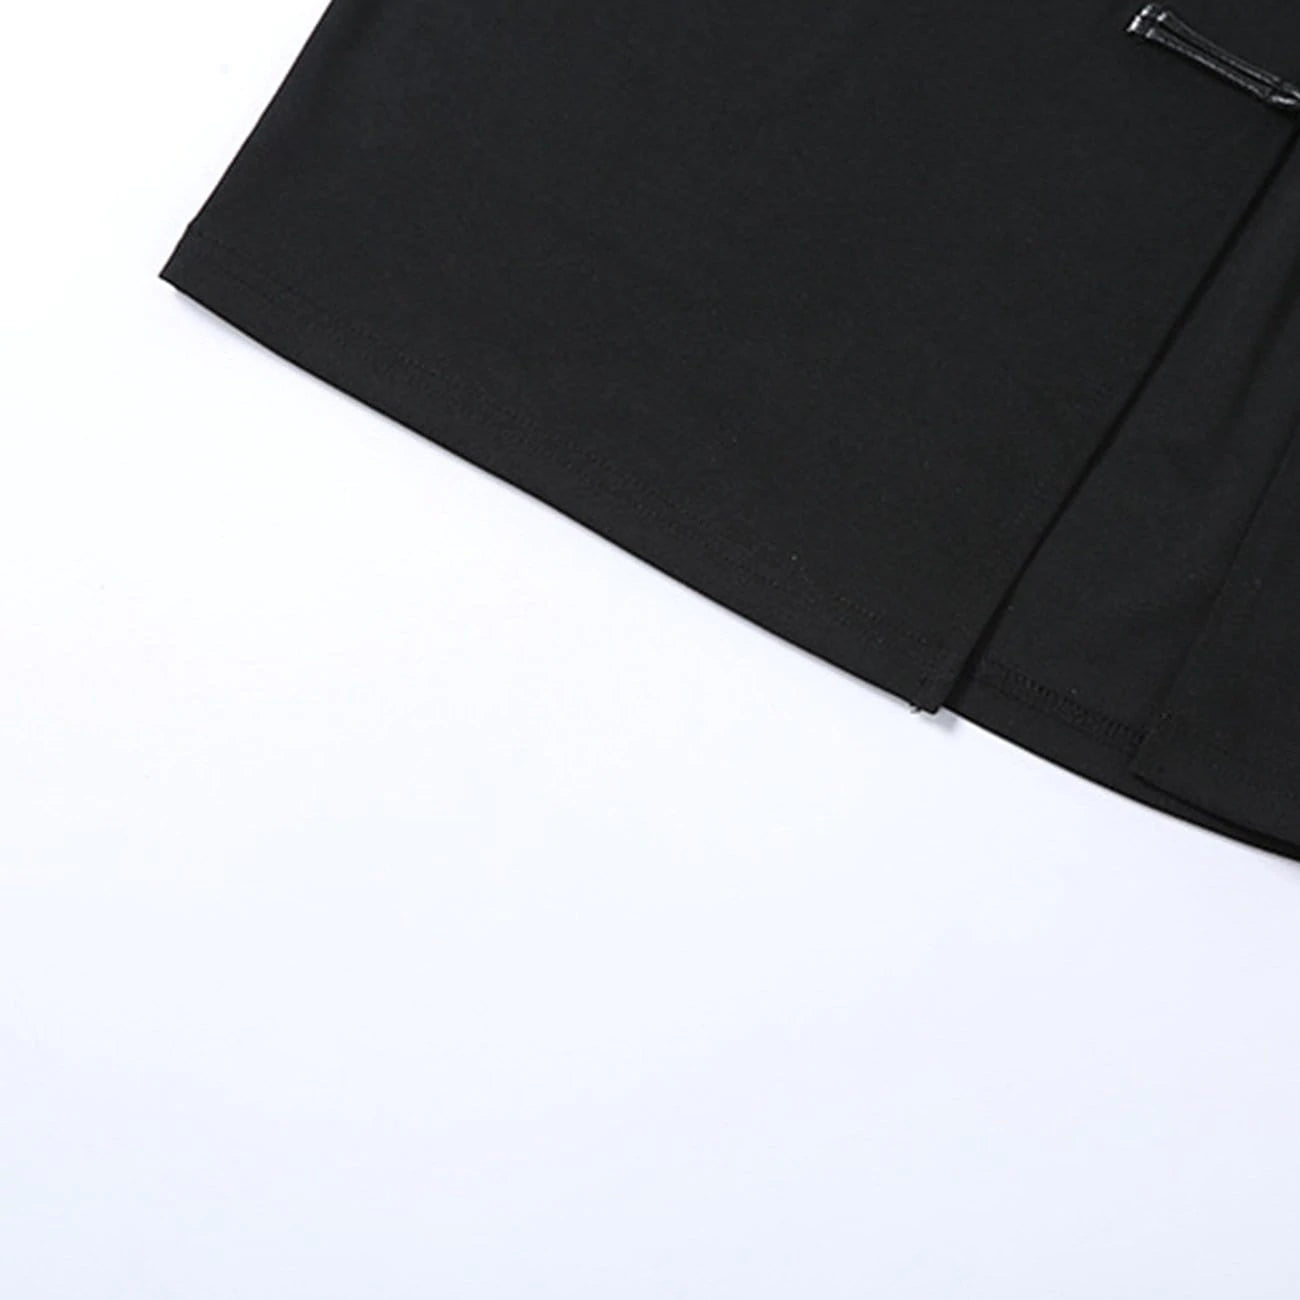 TO Slim Fit Buckle Skirt